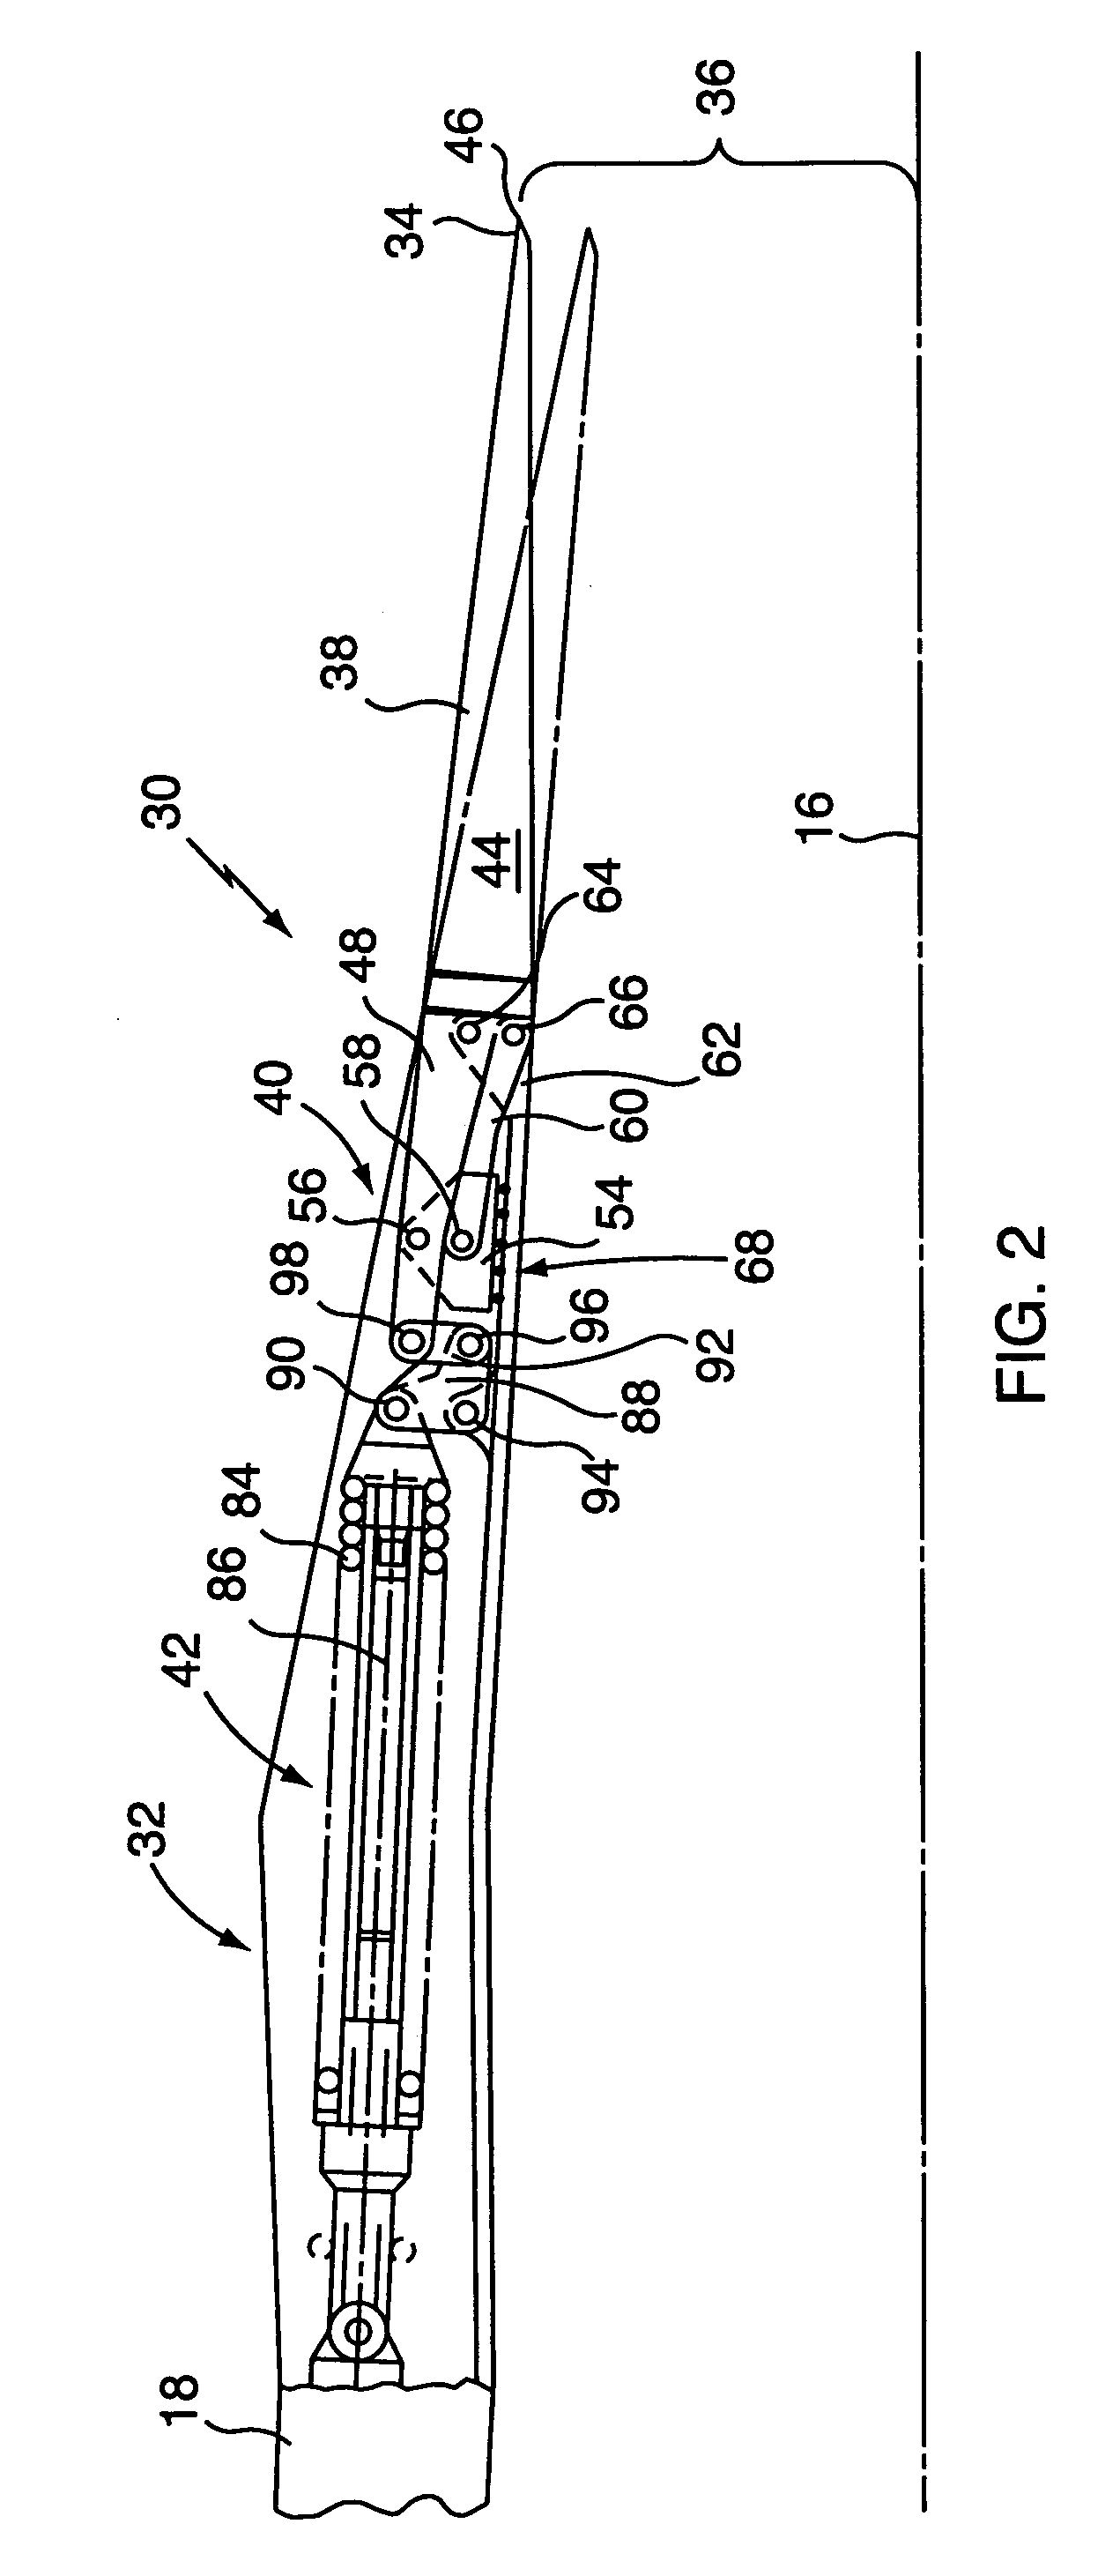 Variable area nozzle for gas turbine engines driven by shape memory alloy actuators